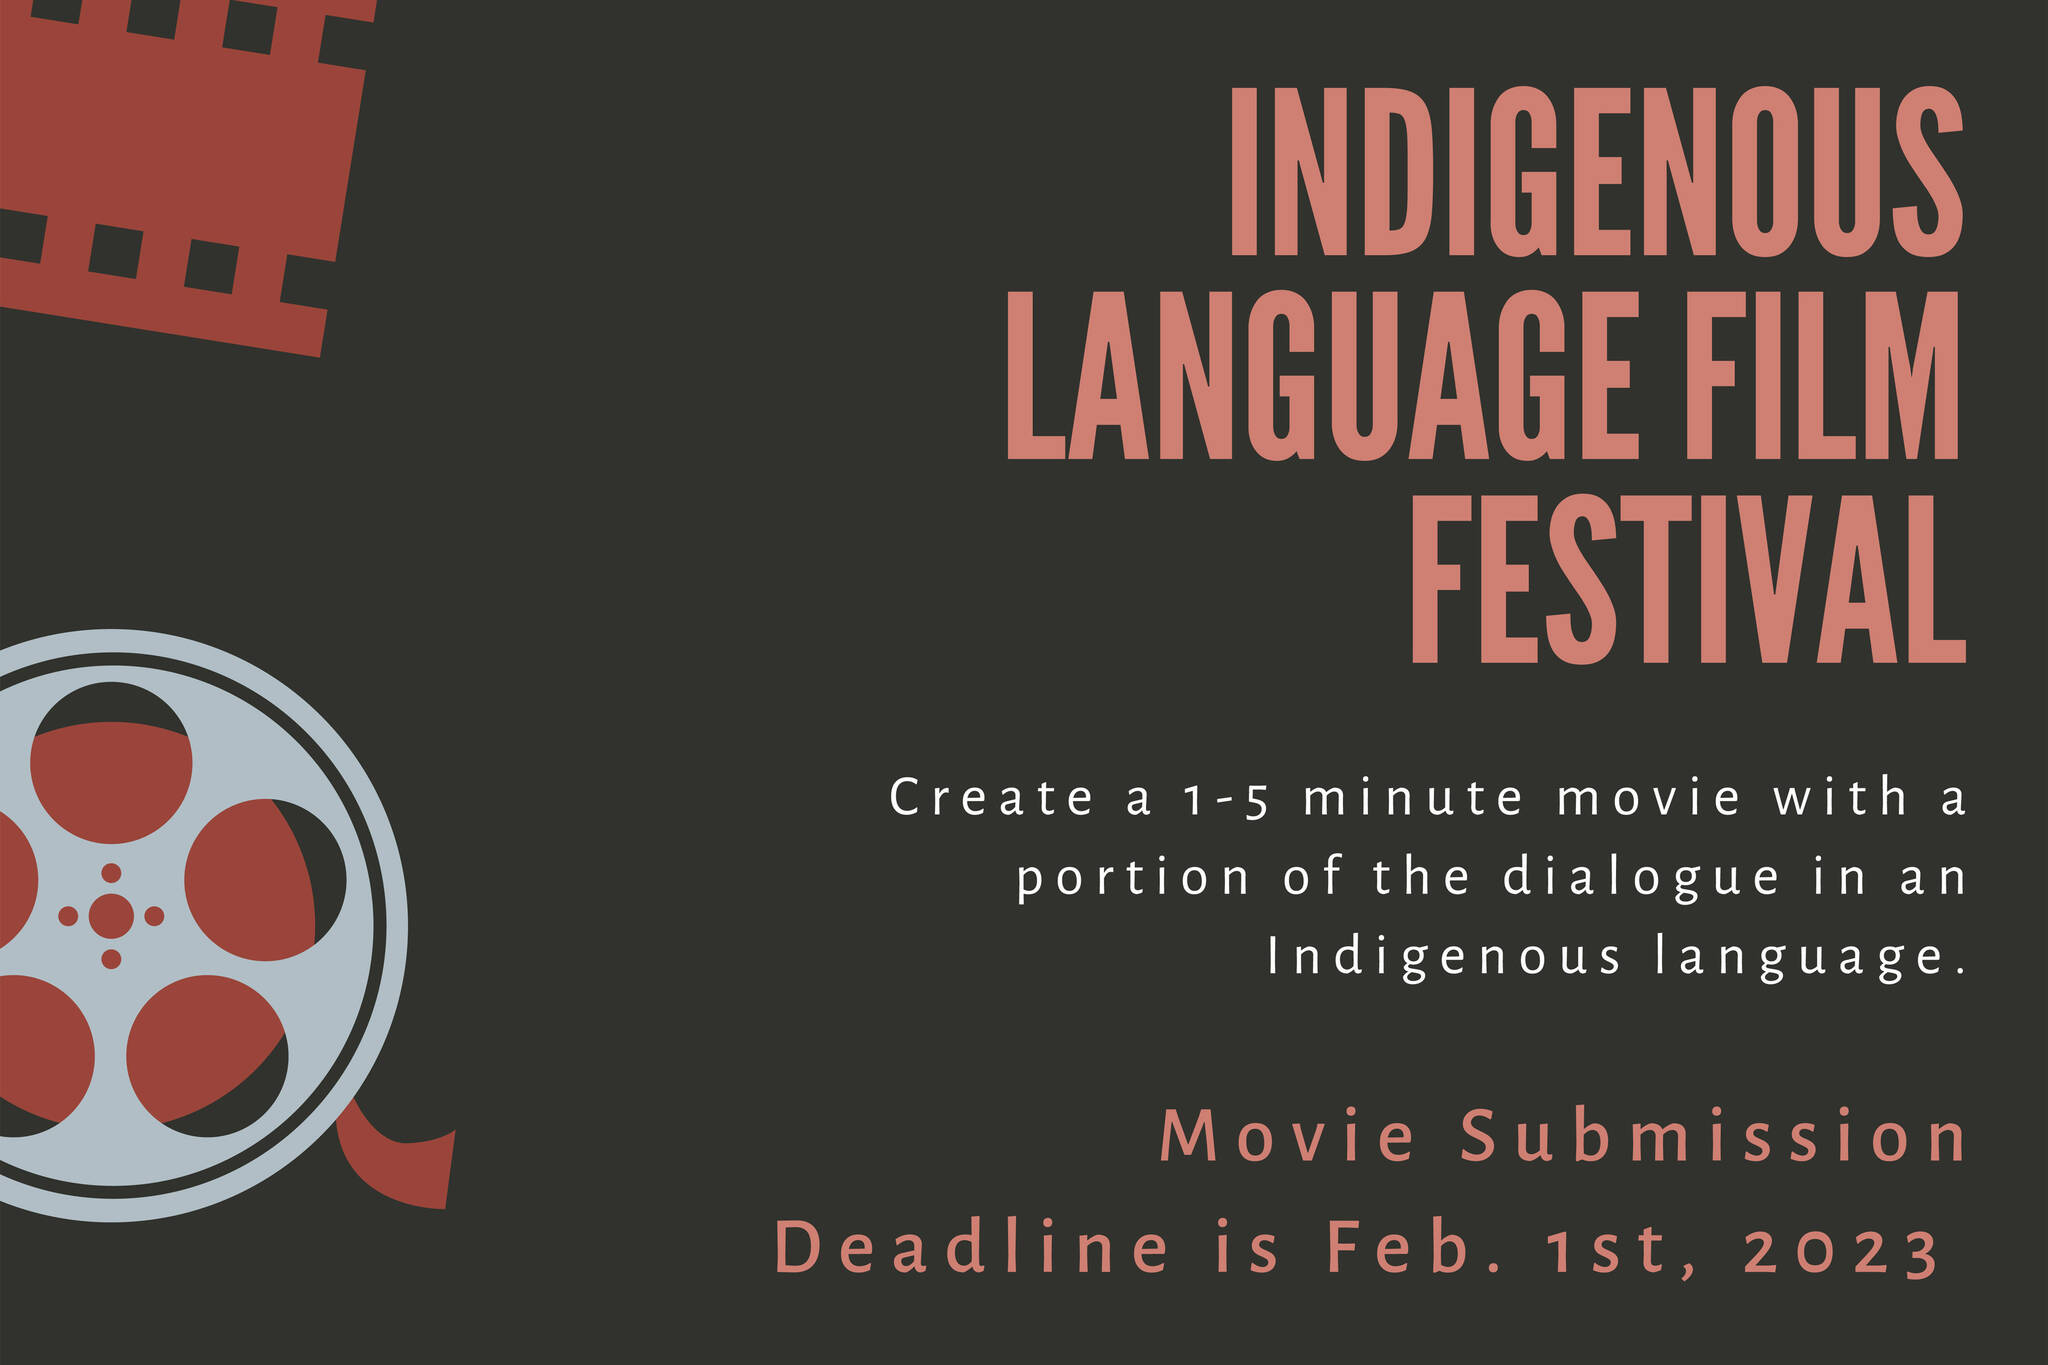 Promotional flyer for the Indigenous Language Film Festival (Image courtesy KPBSD Title VI)